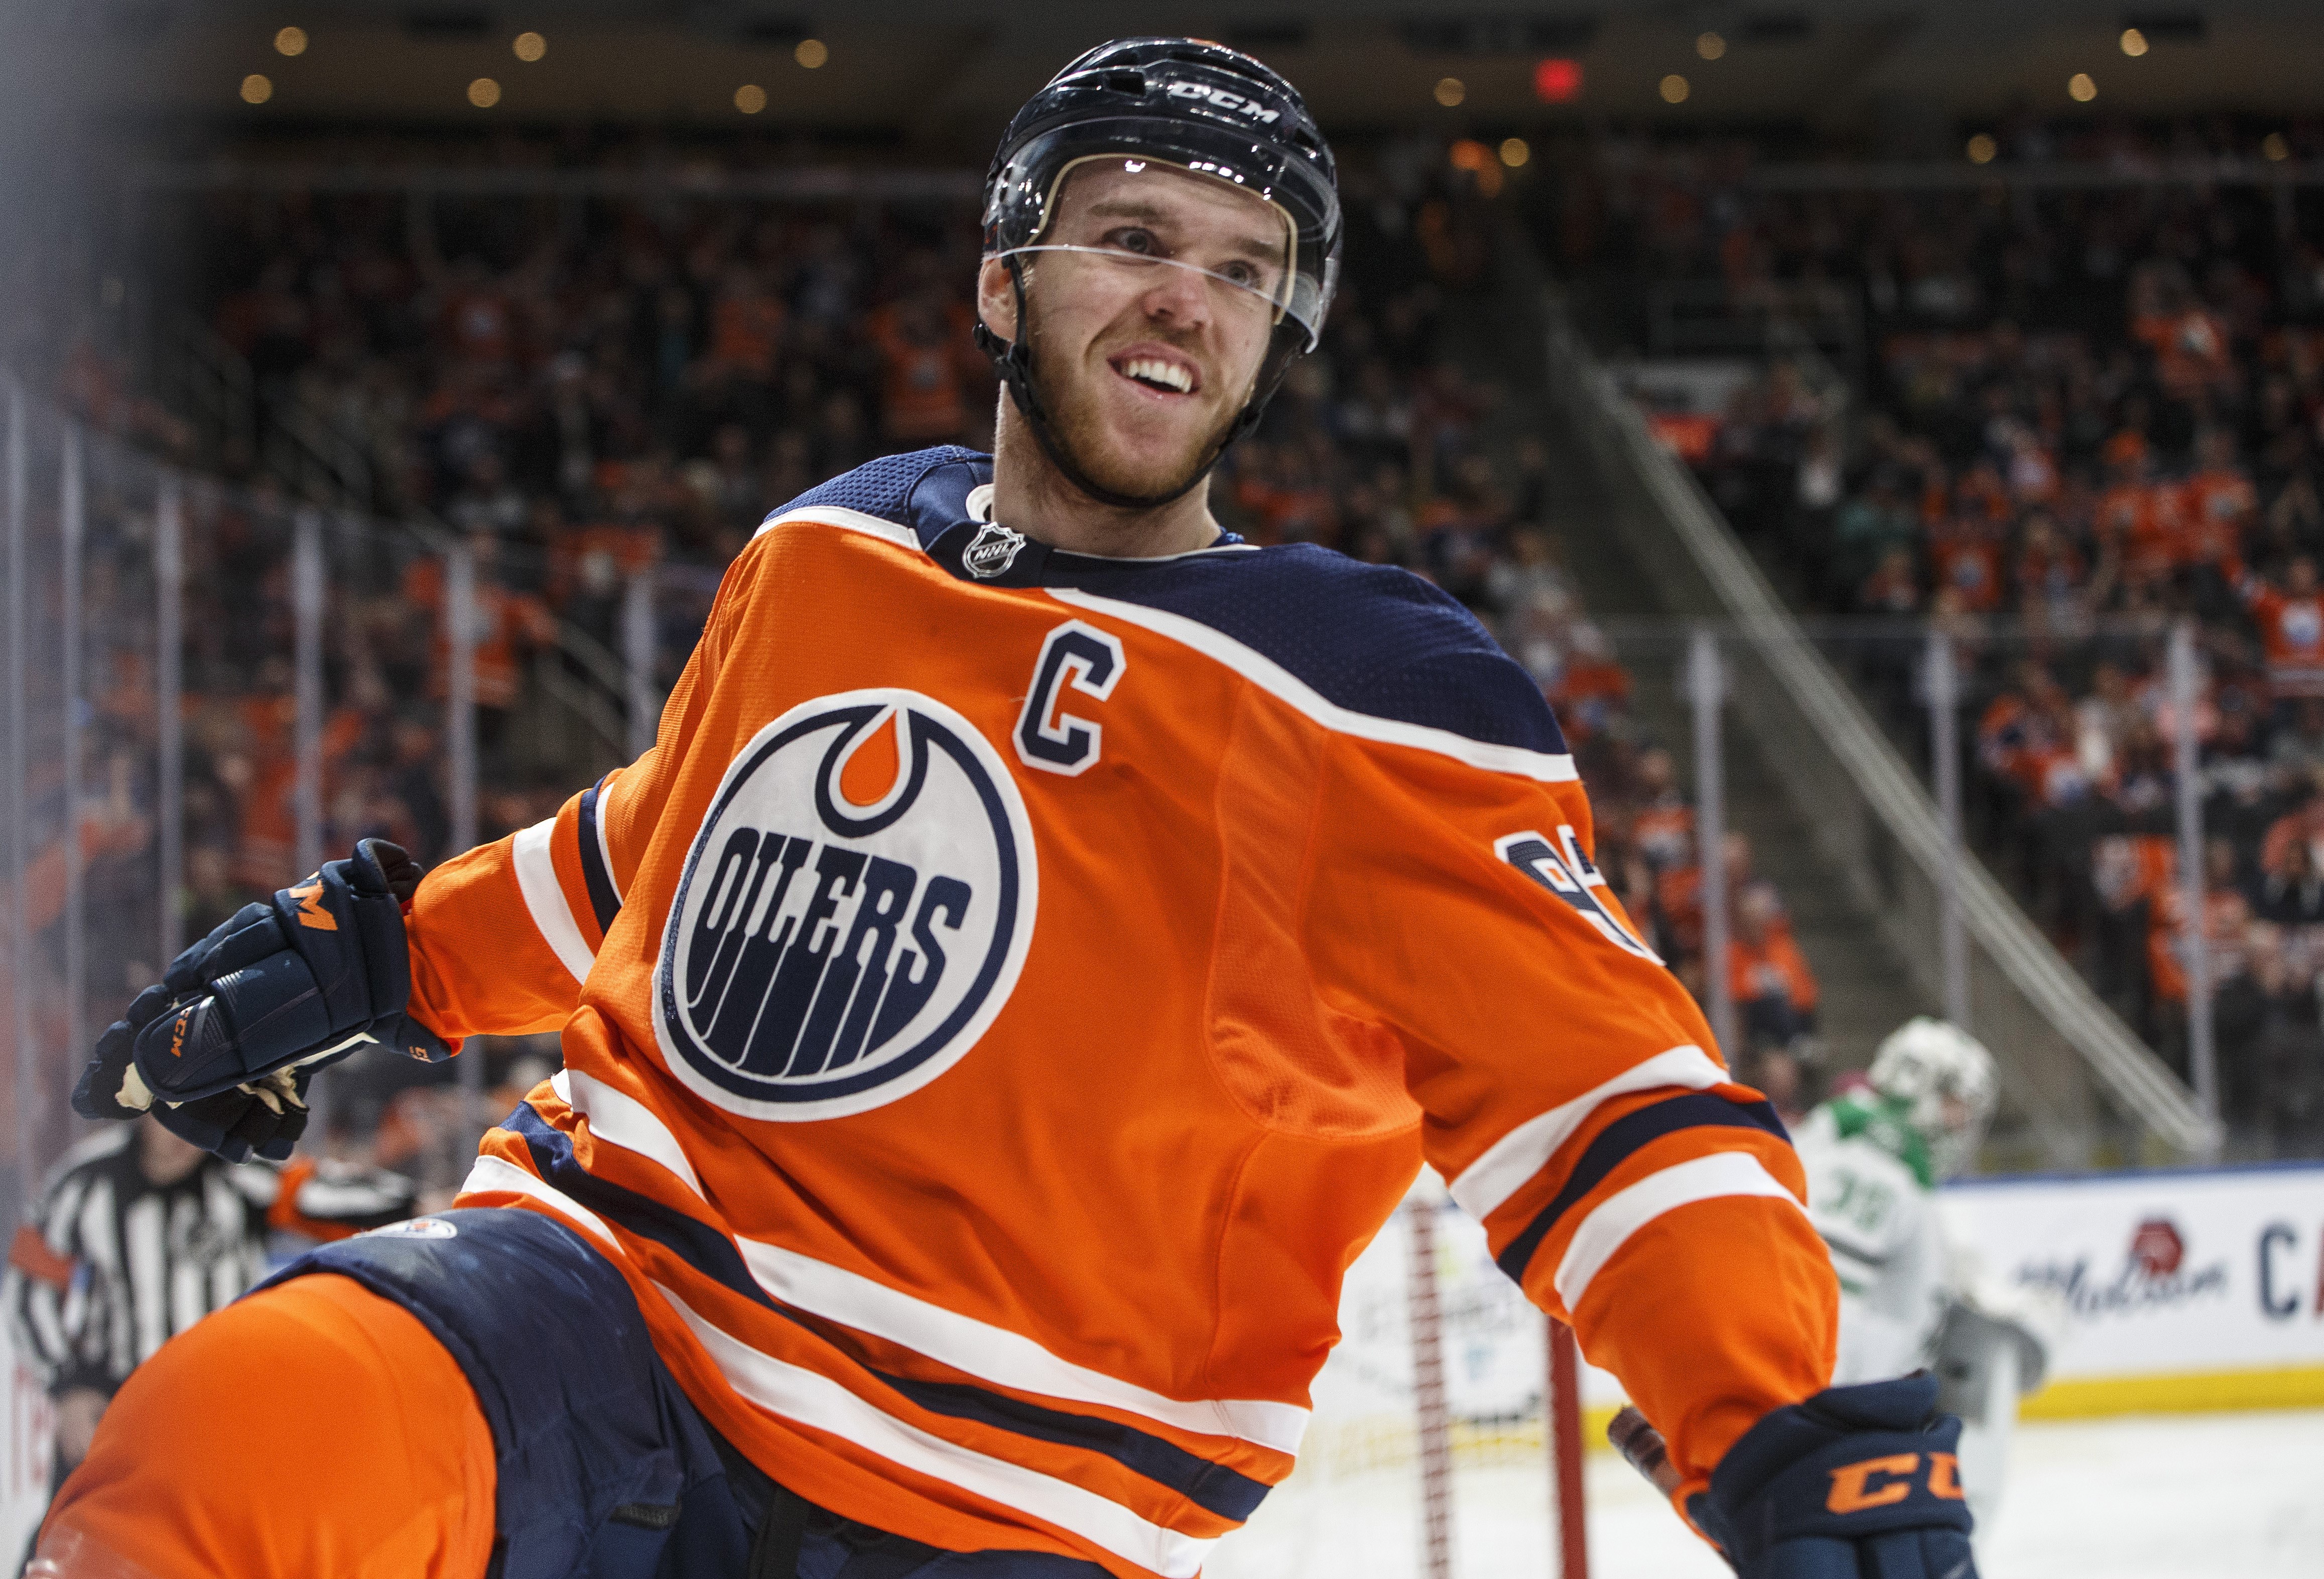 Edmonton Oilers' Connor McDavid wins second Hart Trophy as NHL's top player, NHL